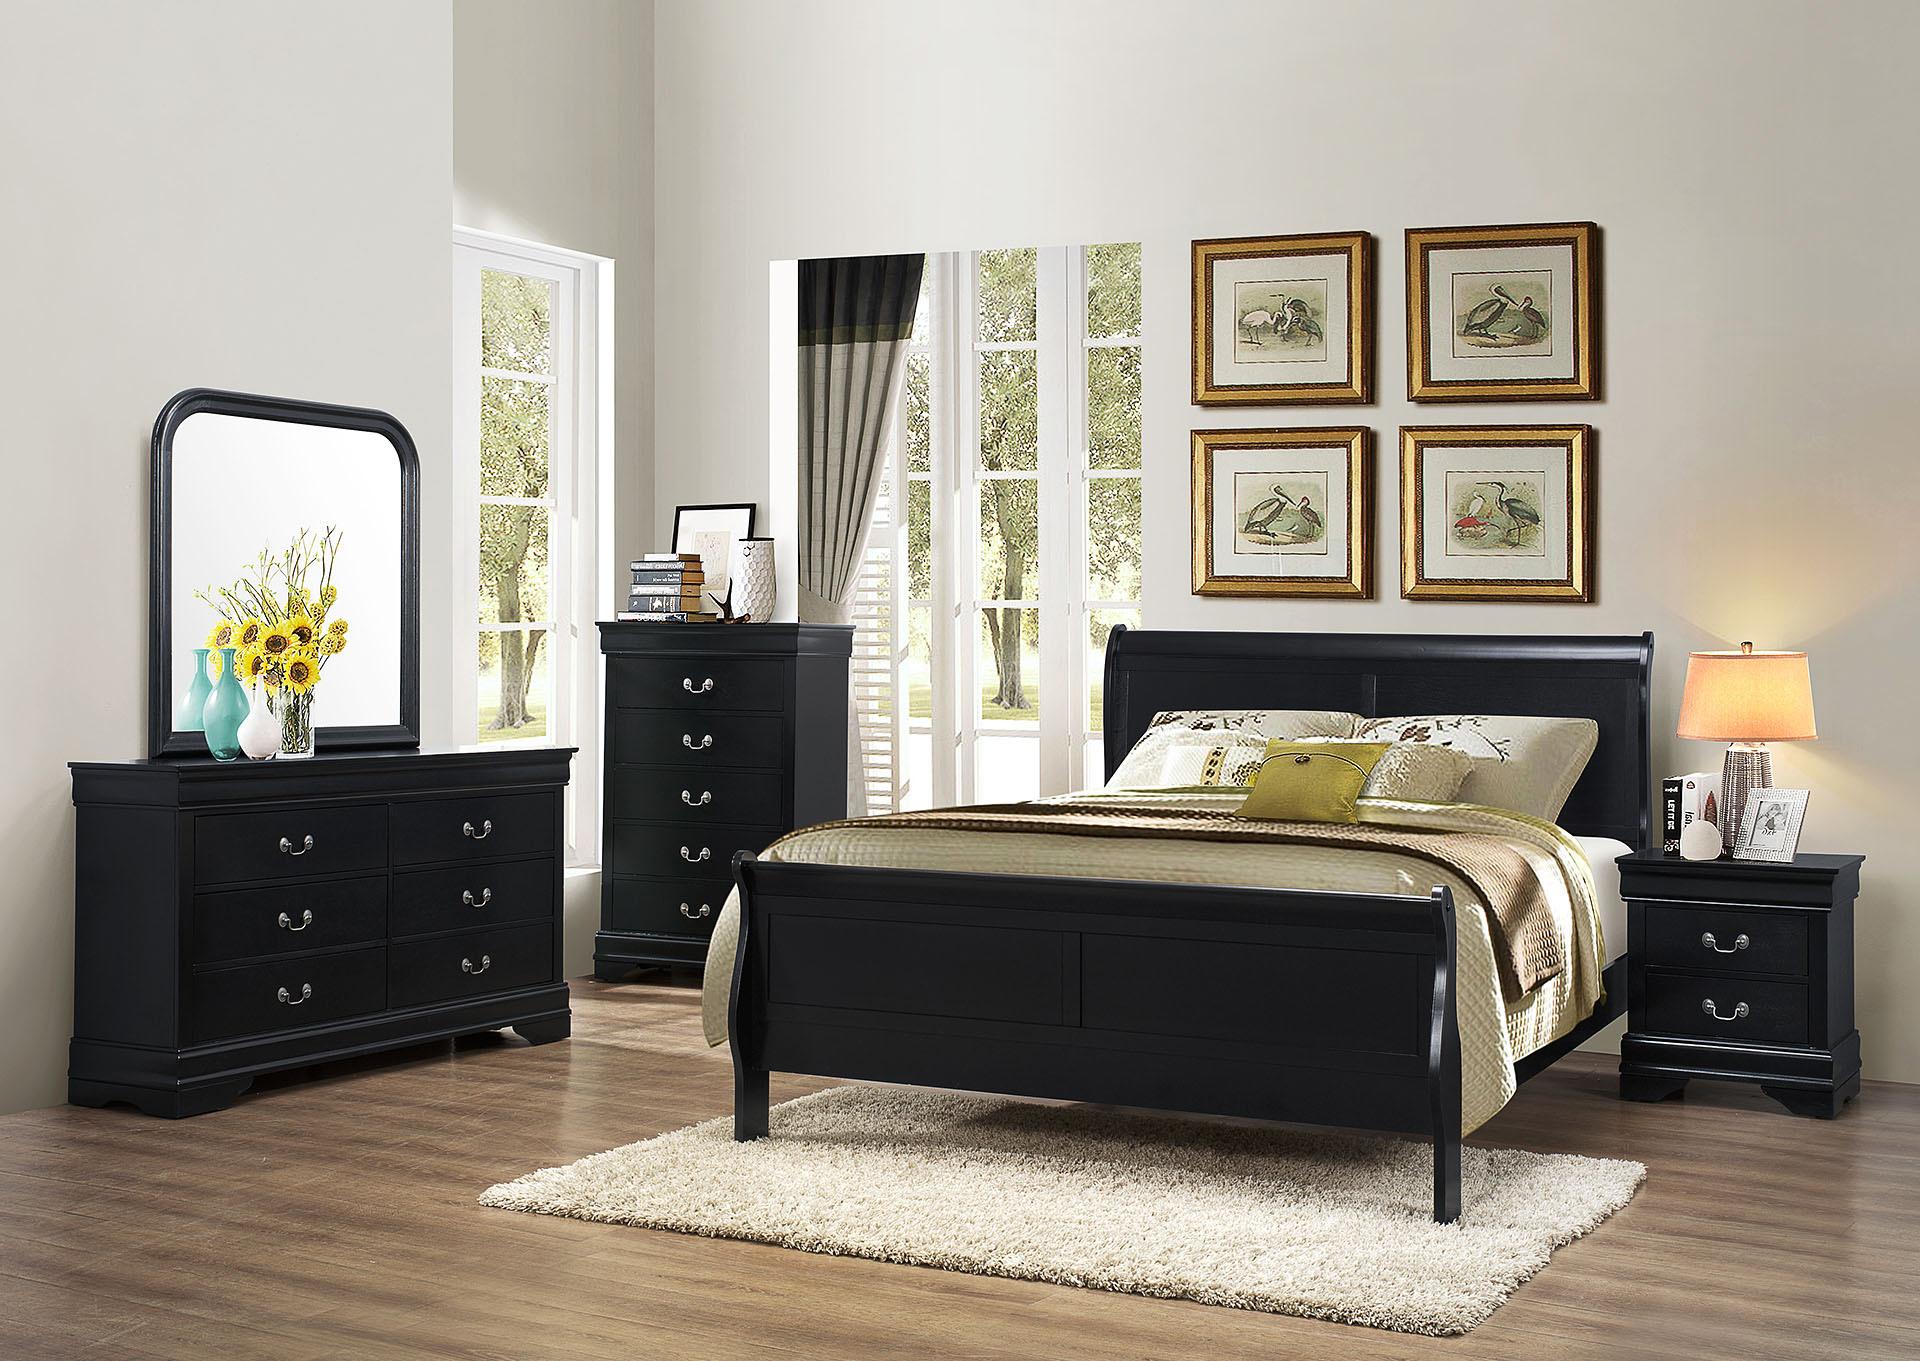 Black King Sleigh Bed LOUIS PHILLIPE Galaxy Home Traditional Modern